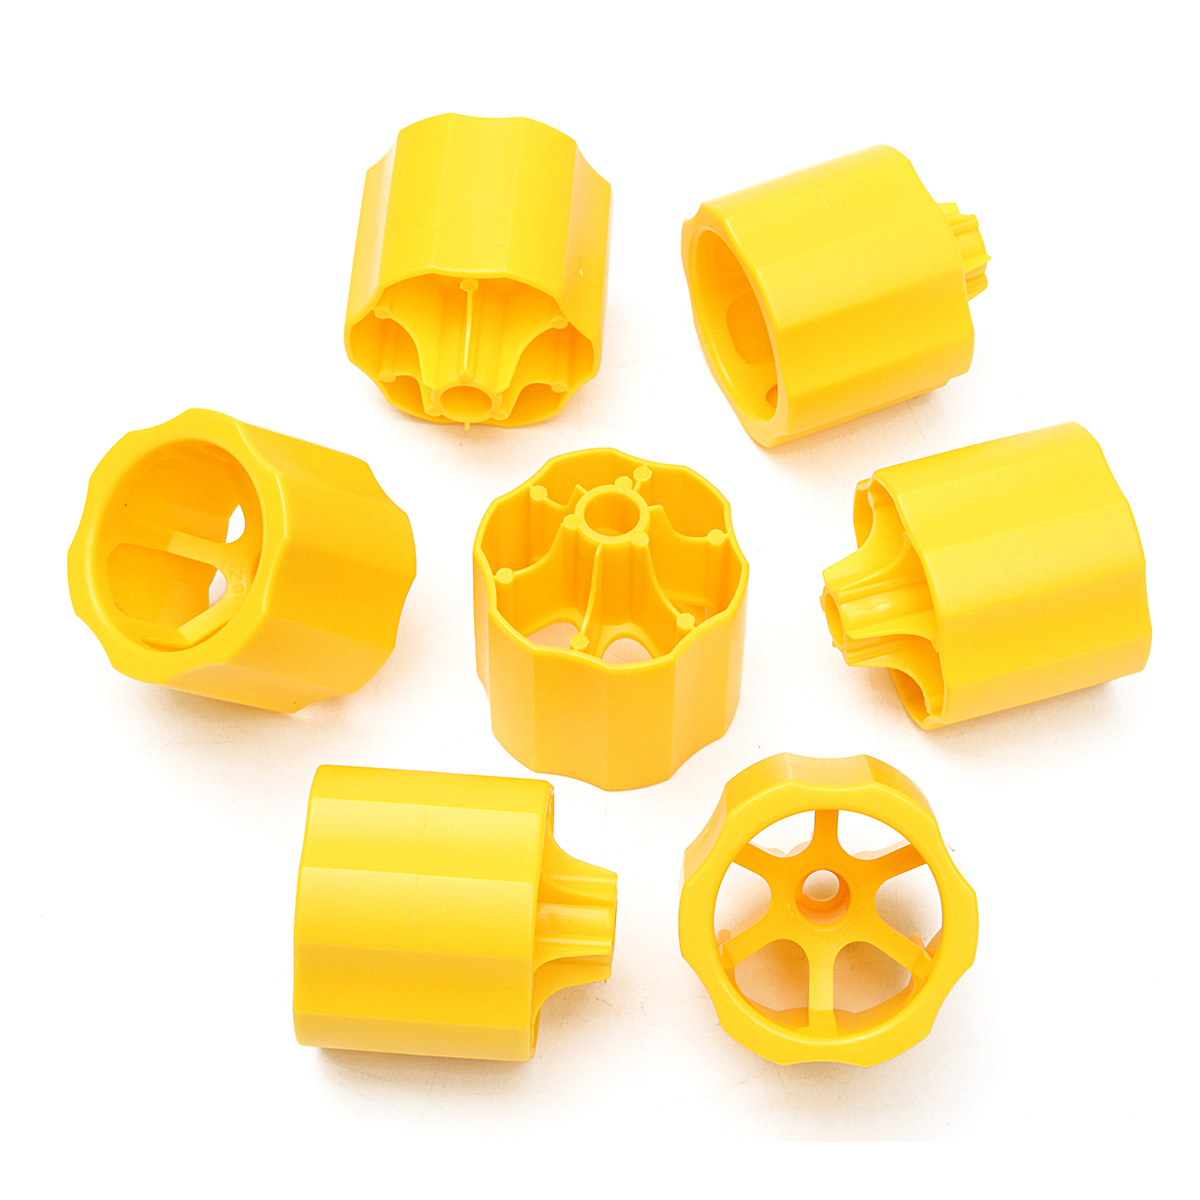 100Pcs-Reusable-Tile-Leveling-System-Levelers-Caps-Spacers-Wall-Floors-Tools-1844043-6